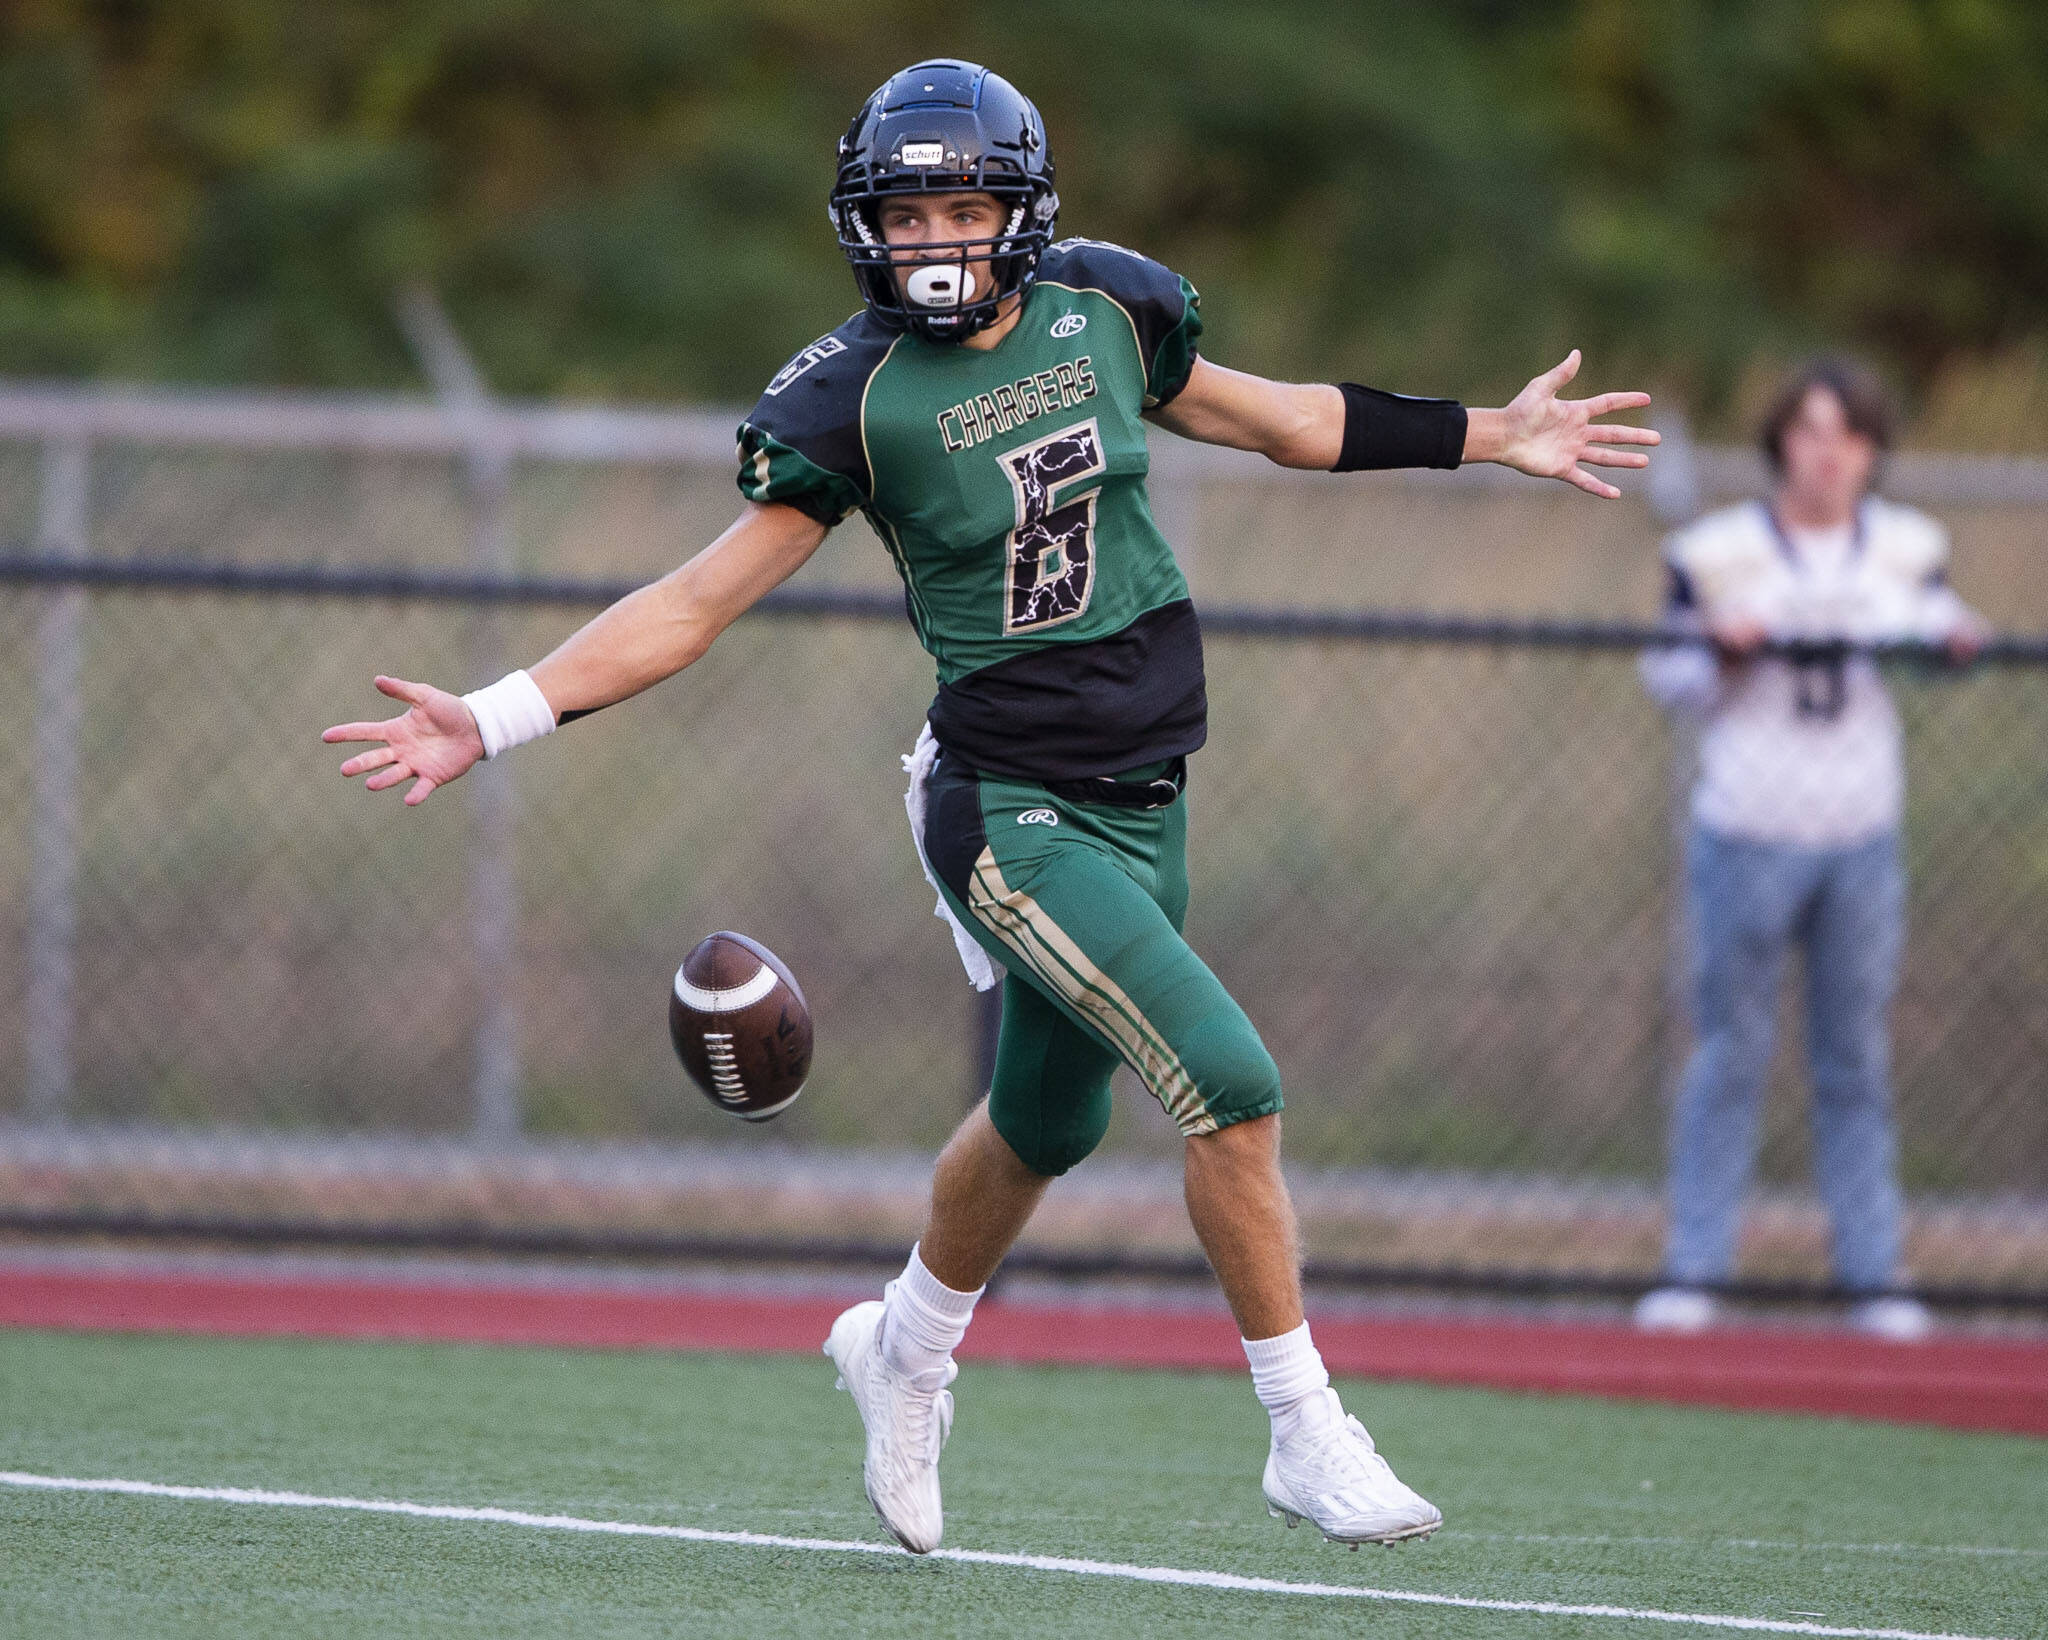 Marysville Getchell’s Carter Schmidt celebrates after getting a touchdown during the game against Arlington on Friday, Sept. 9, 2022 in Marysville, Washington. (Olivia Vanni / The Herald)